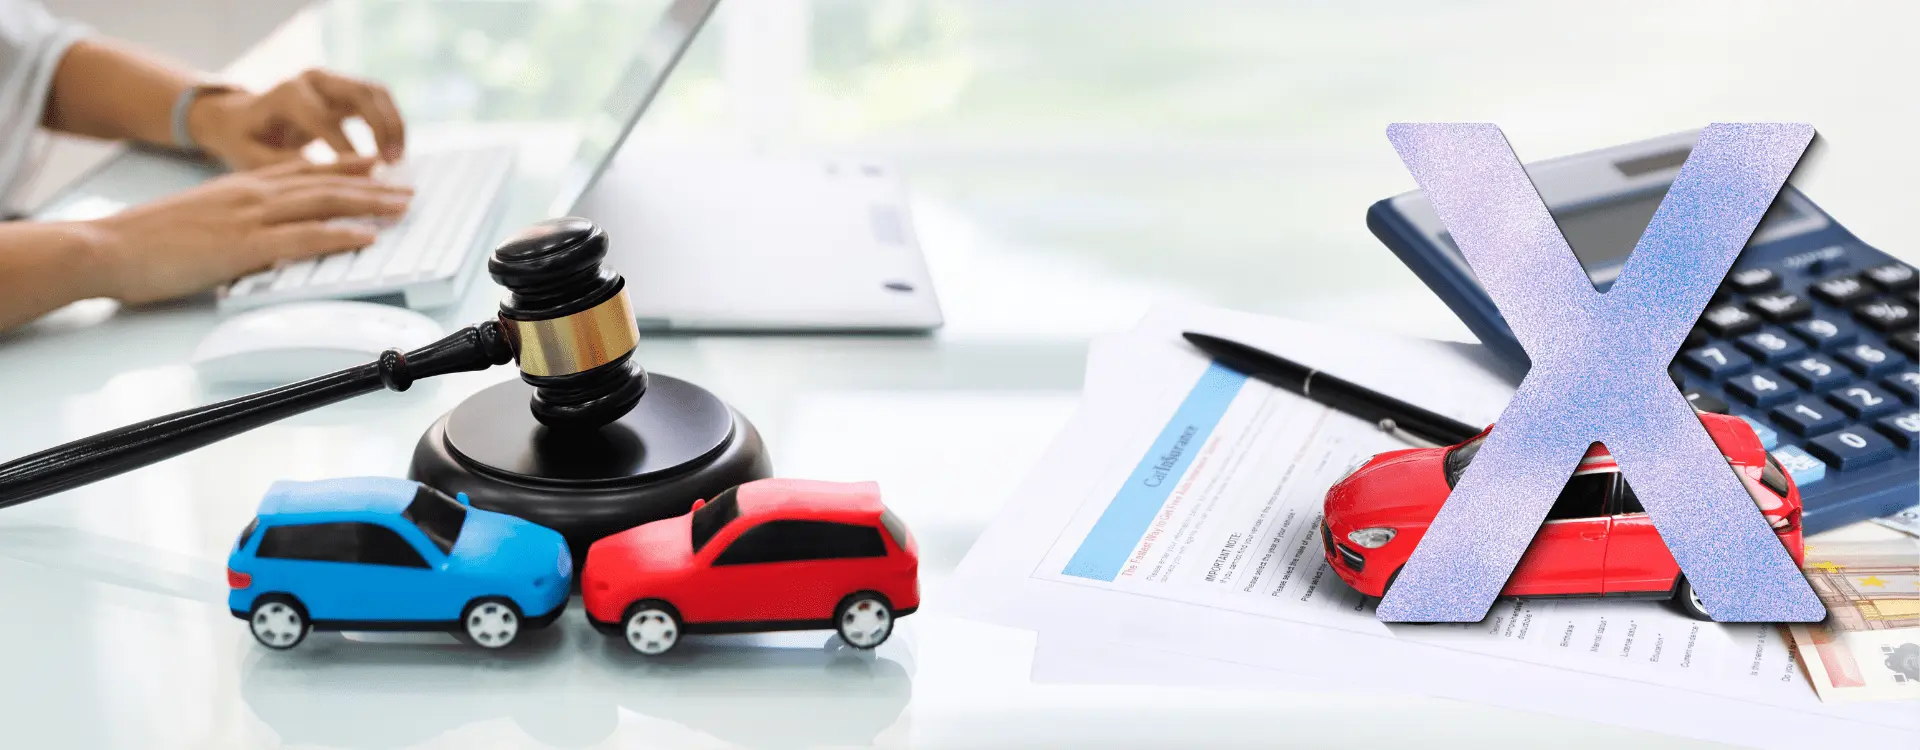 california law about driving without insurance